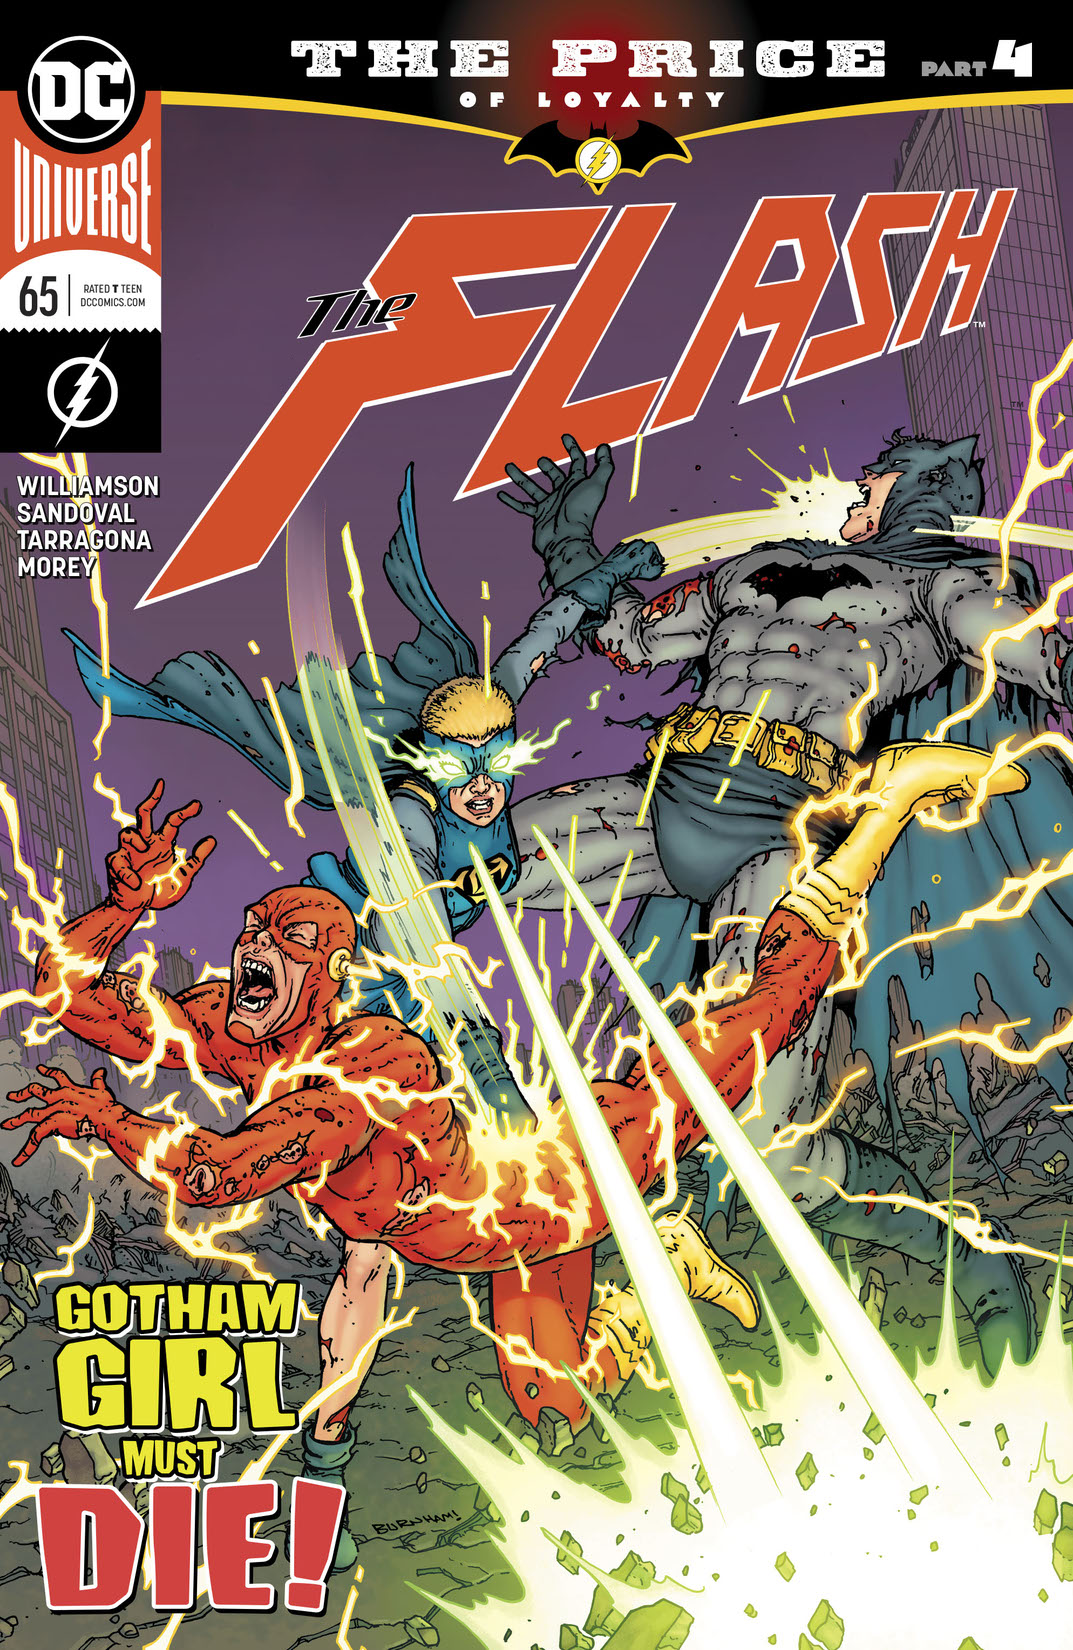 The Flash (2016-) #65 preview images